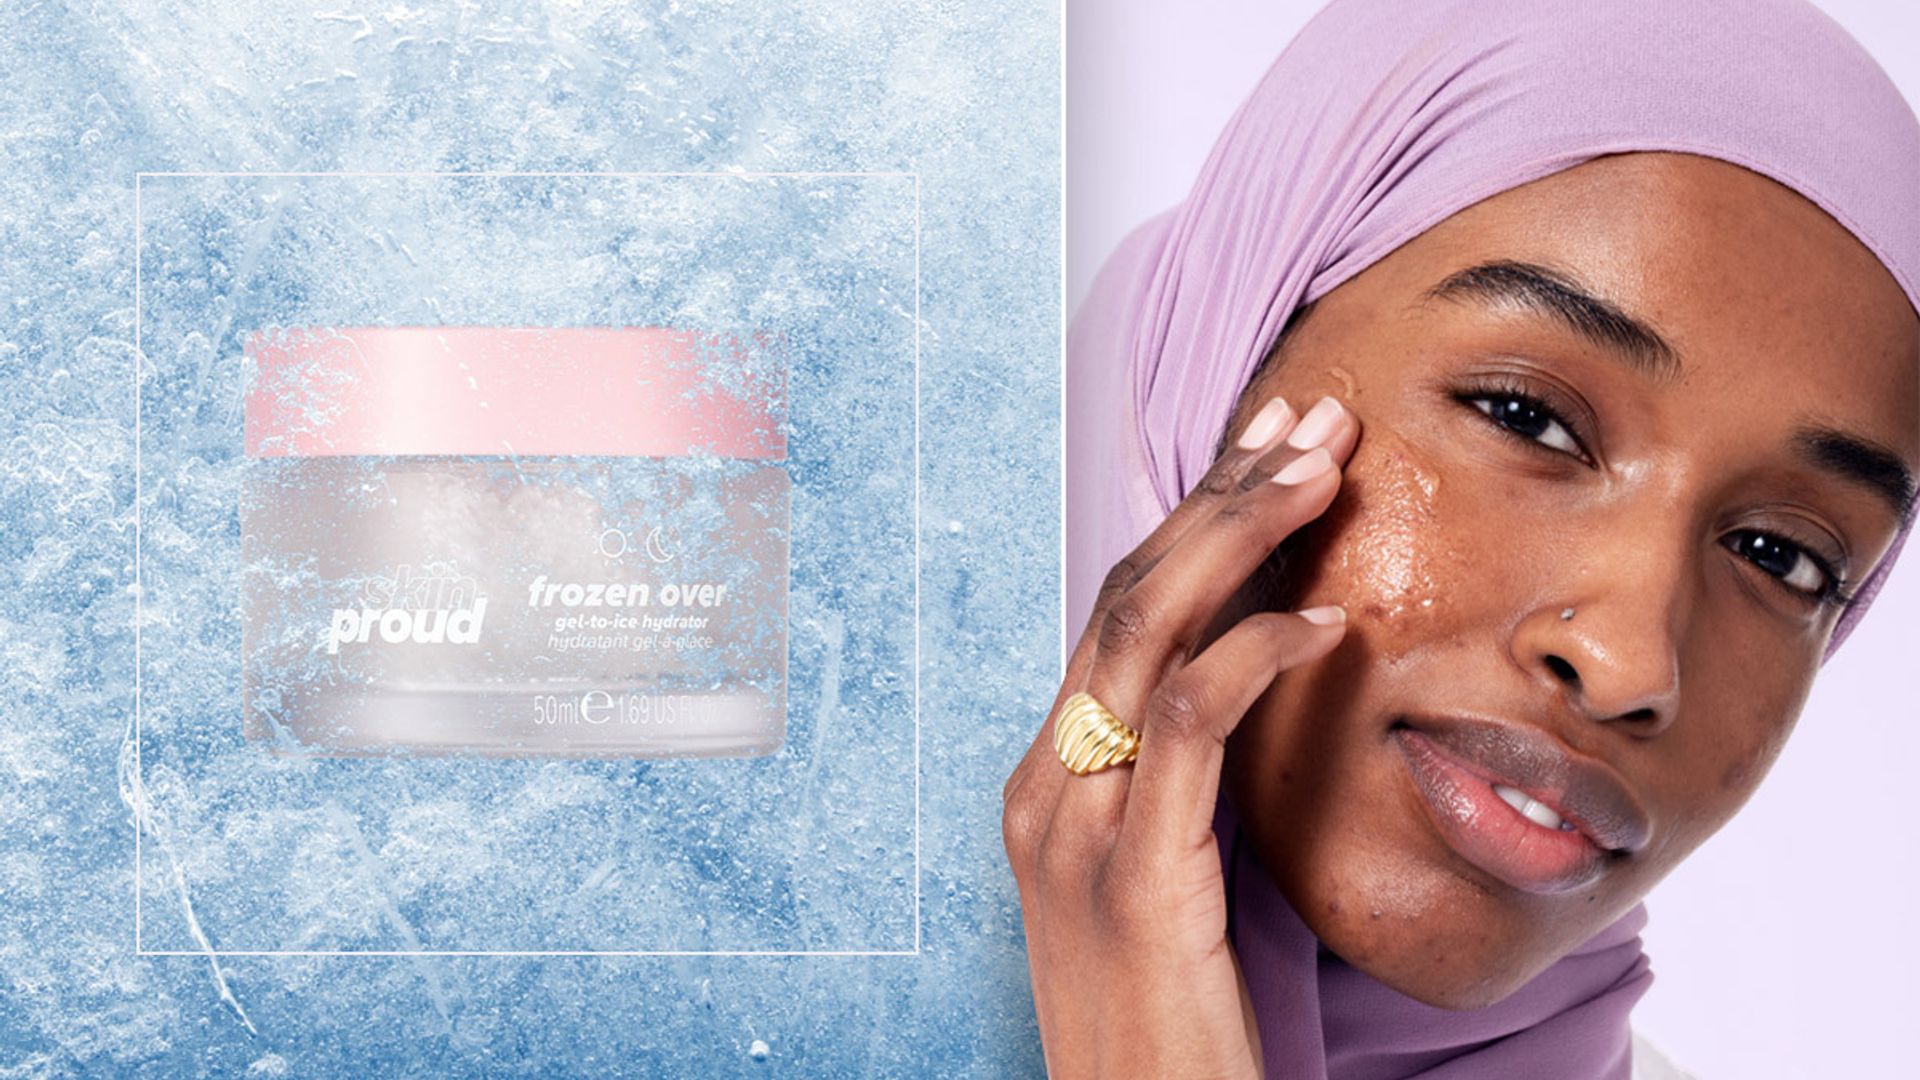 Skin Proud’s £16.95 gel-to-ice cryotherapy moisturiser is TikTok famous - here's why